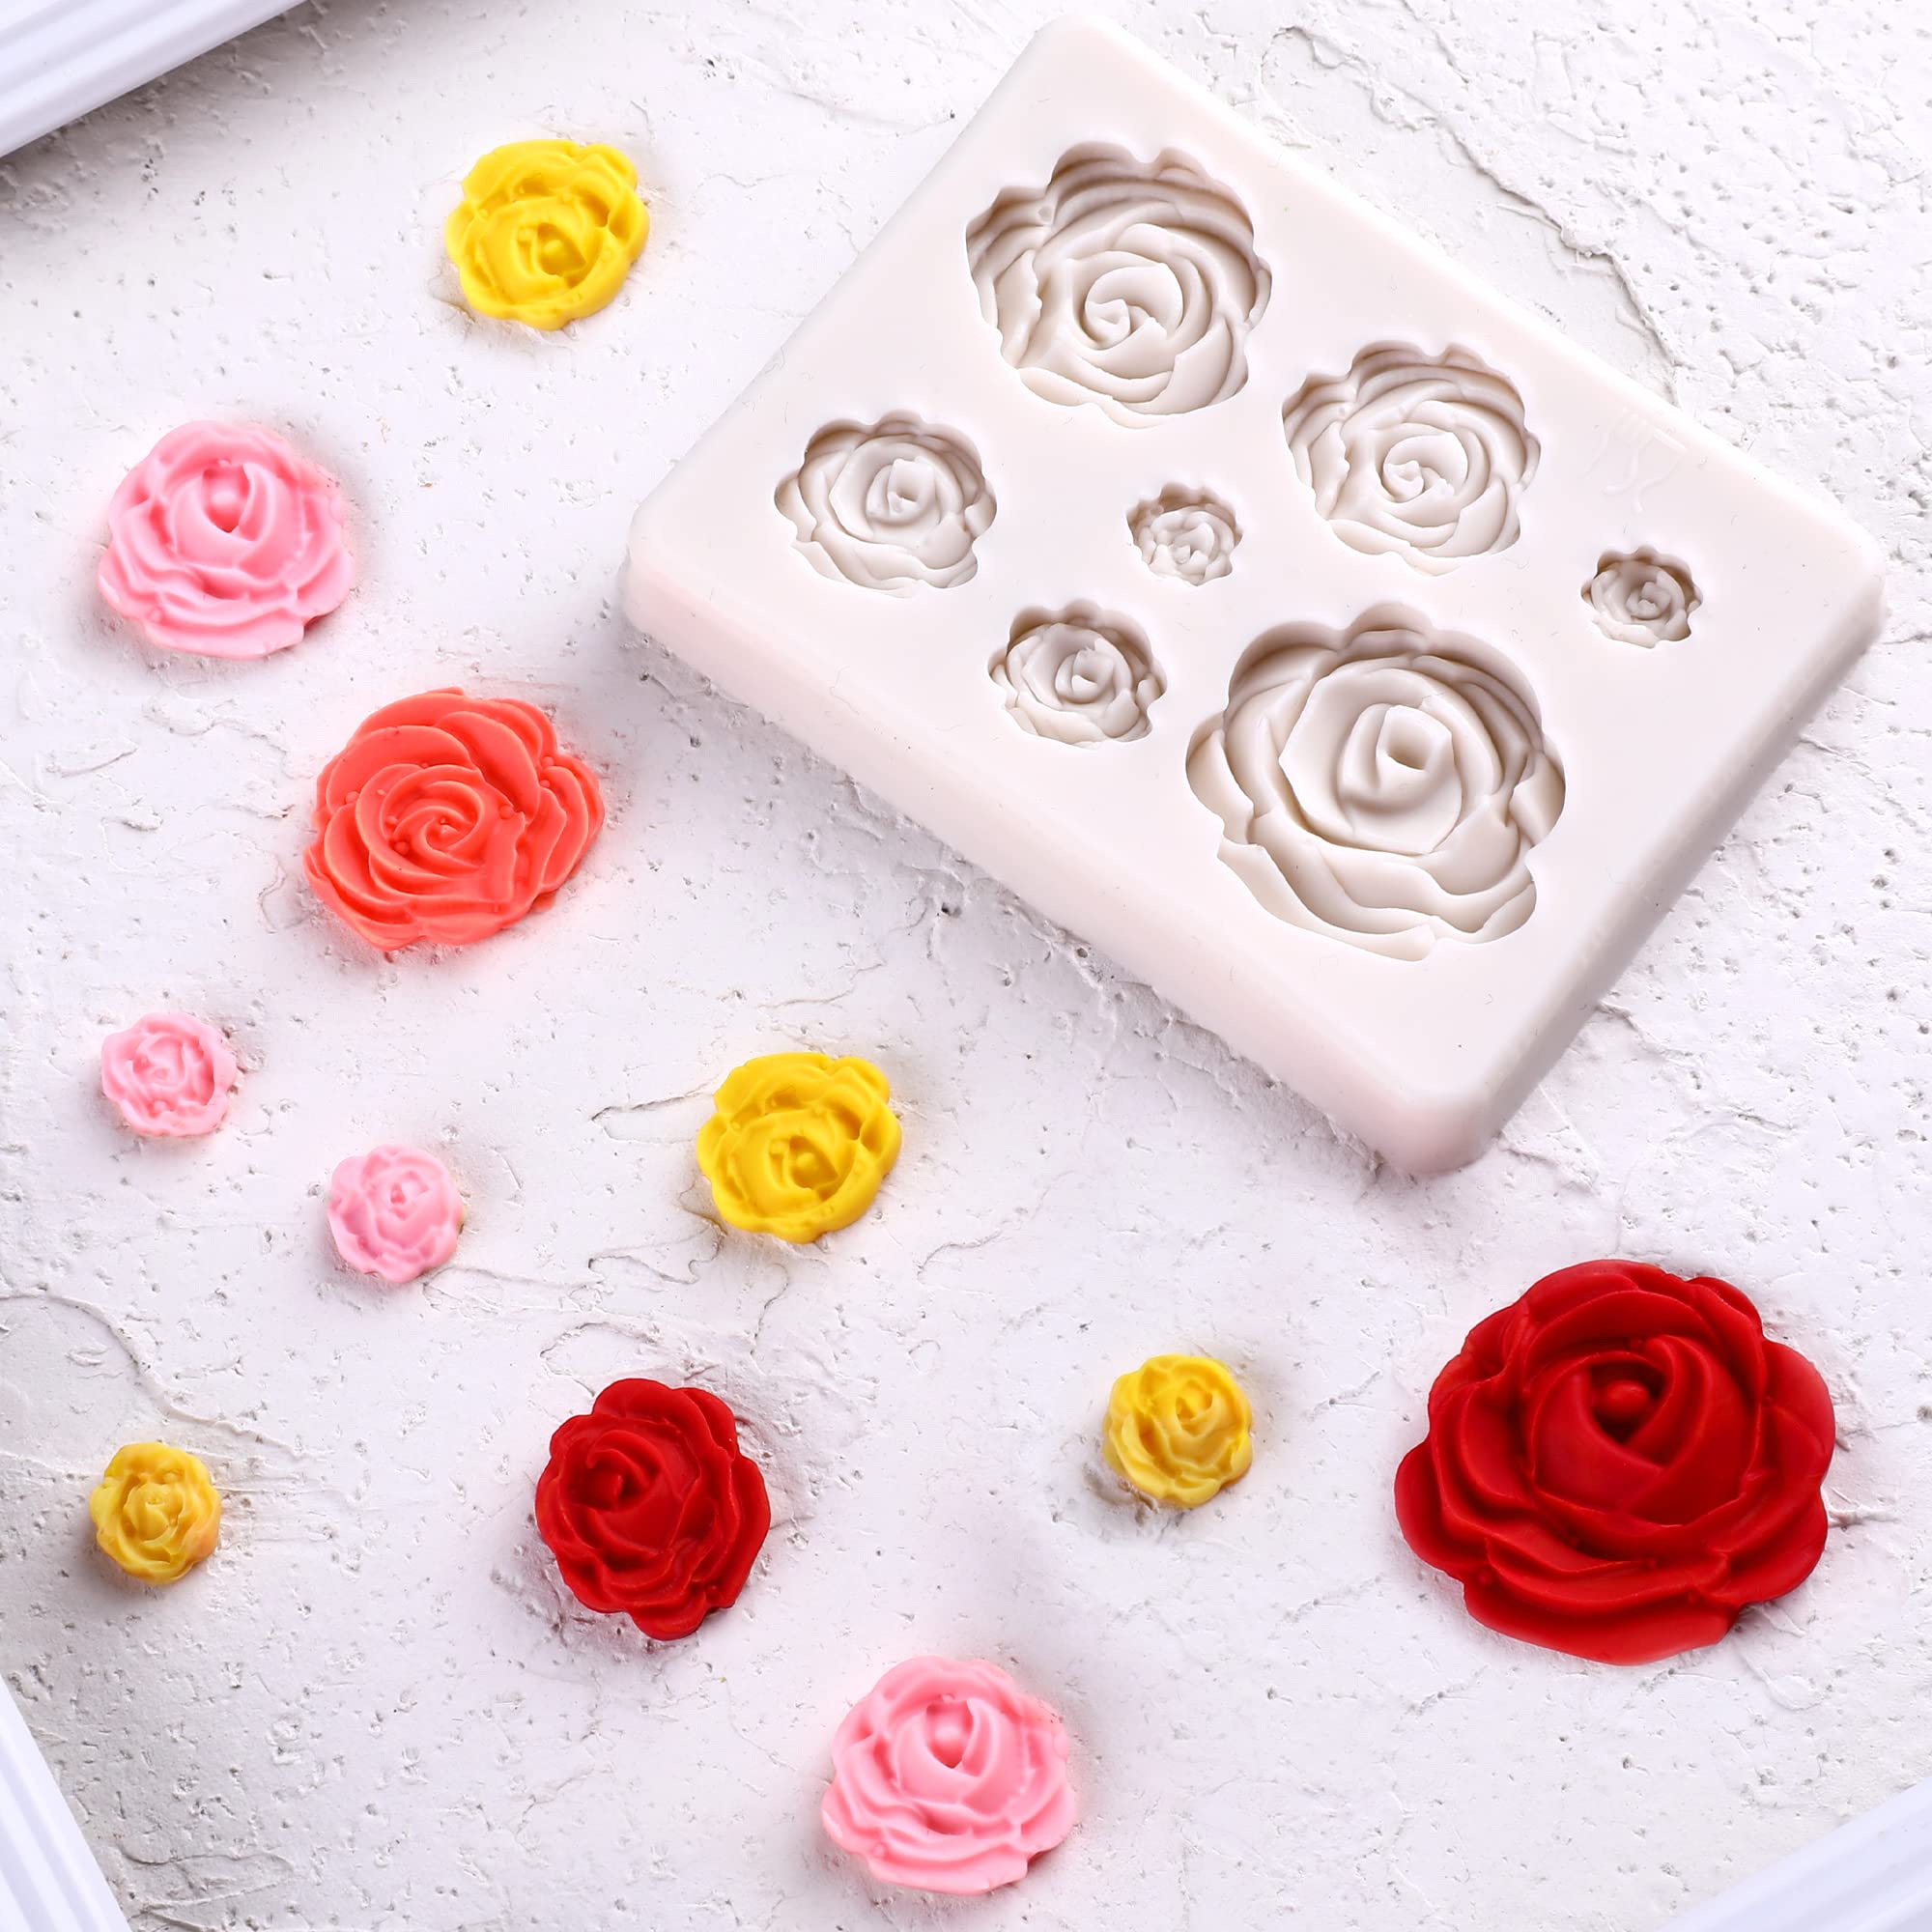 Puocaon Roses Polymer Clay Molds 7 Cavities Mini Flower Silicone